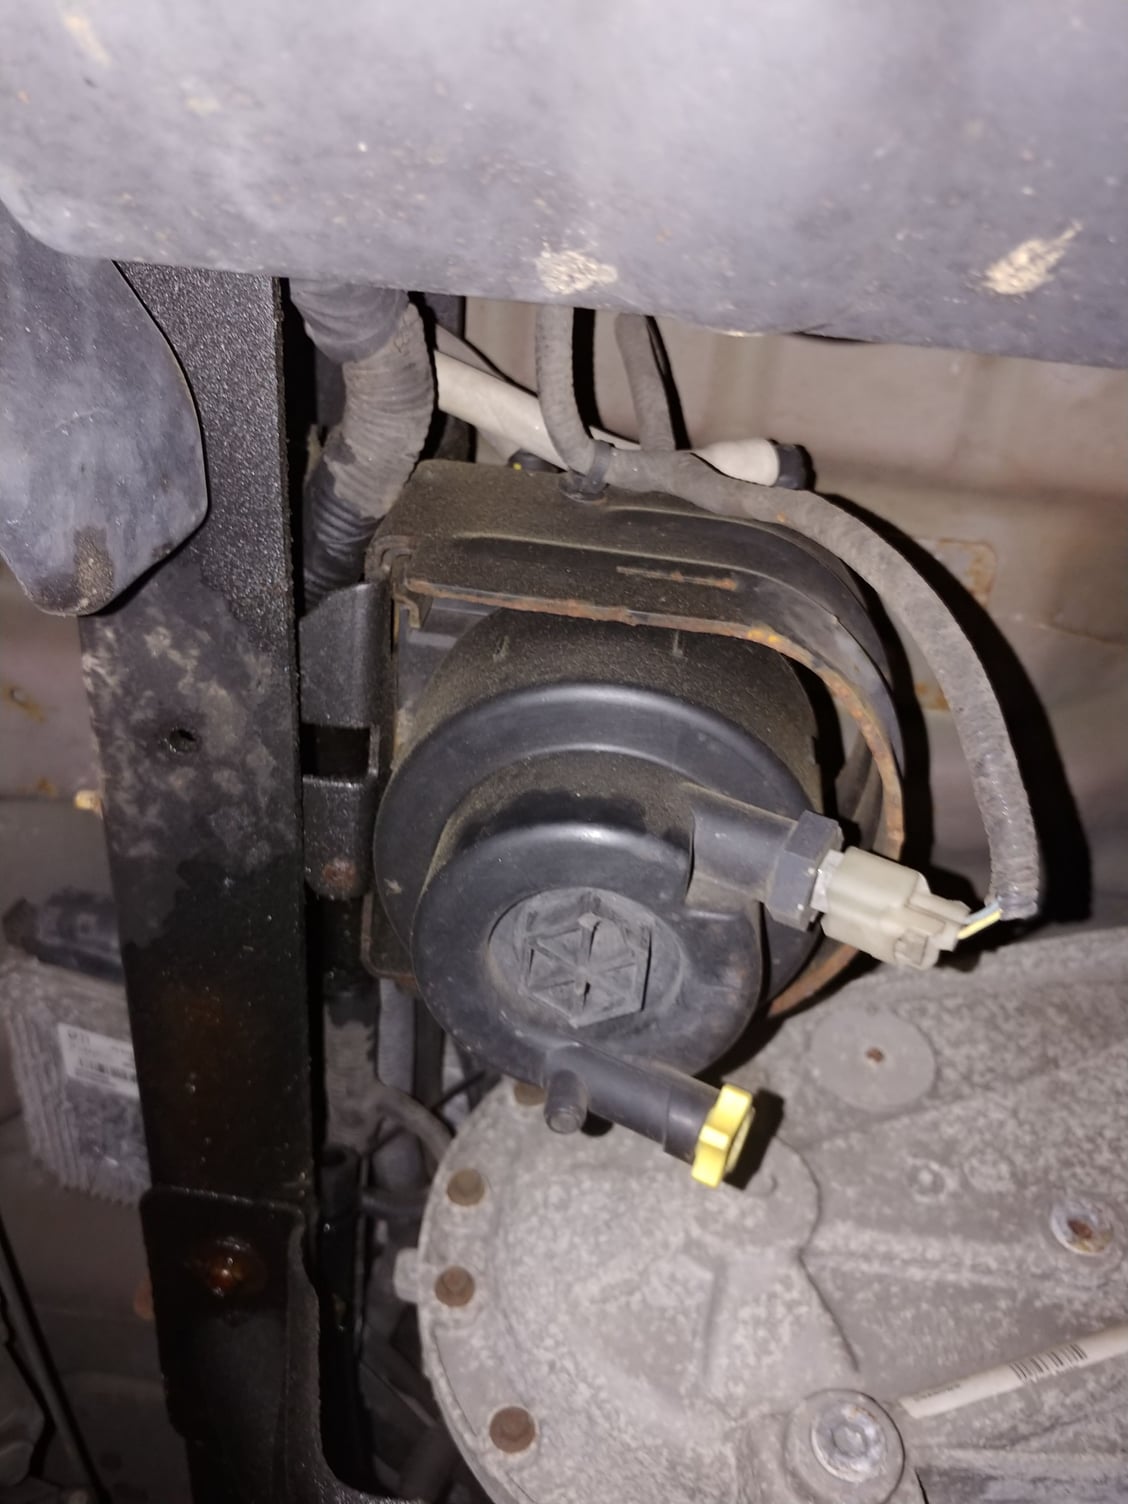 Can you help me identify this part? 2011 f250 Diesel - Ford Truck 2011 F250 6.2 Fuel Pump Problems